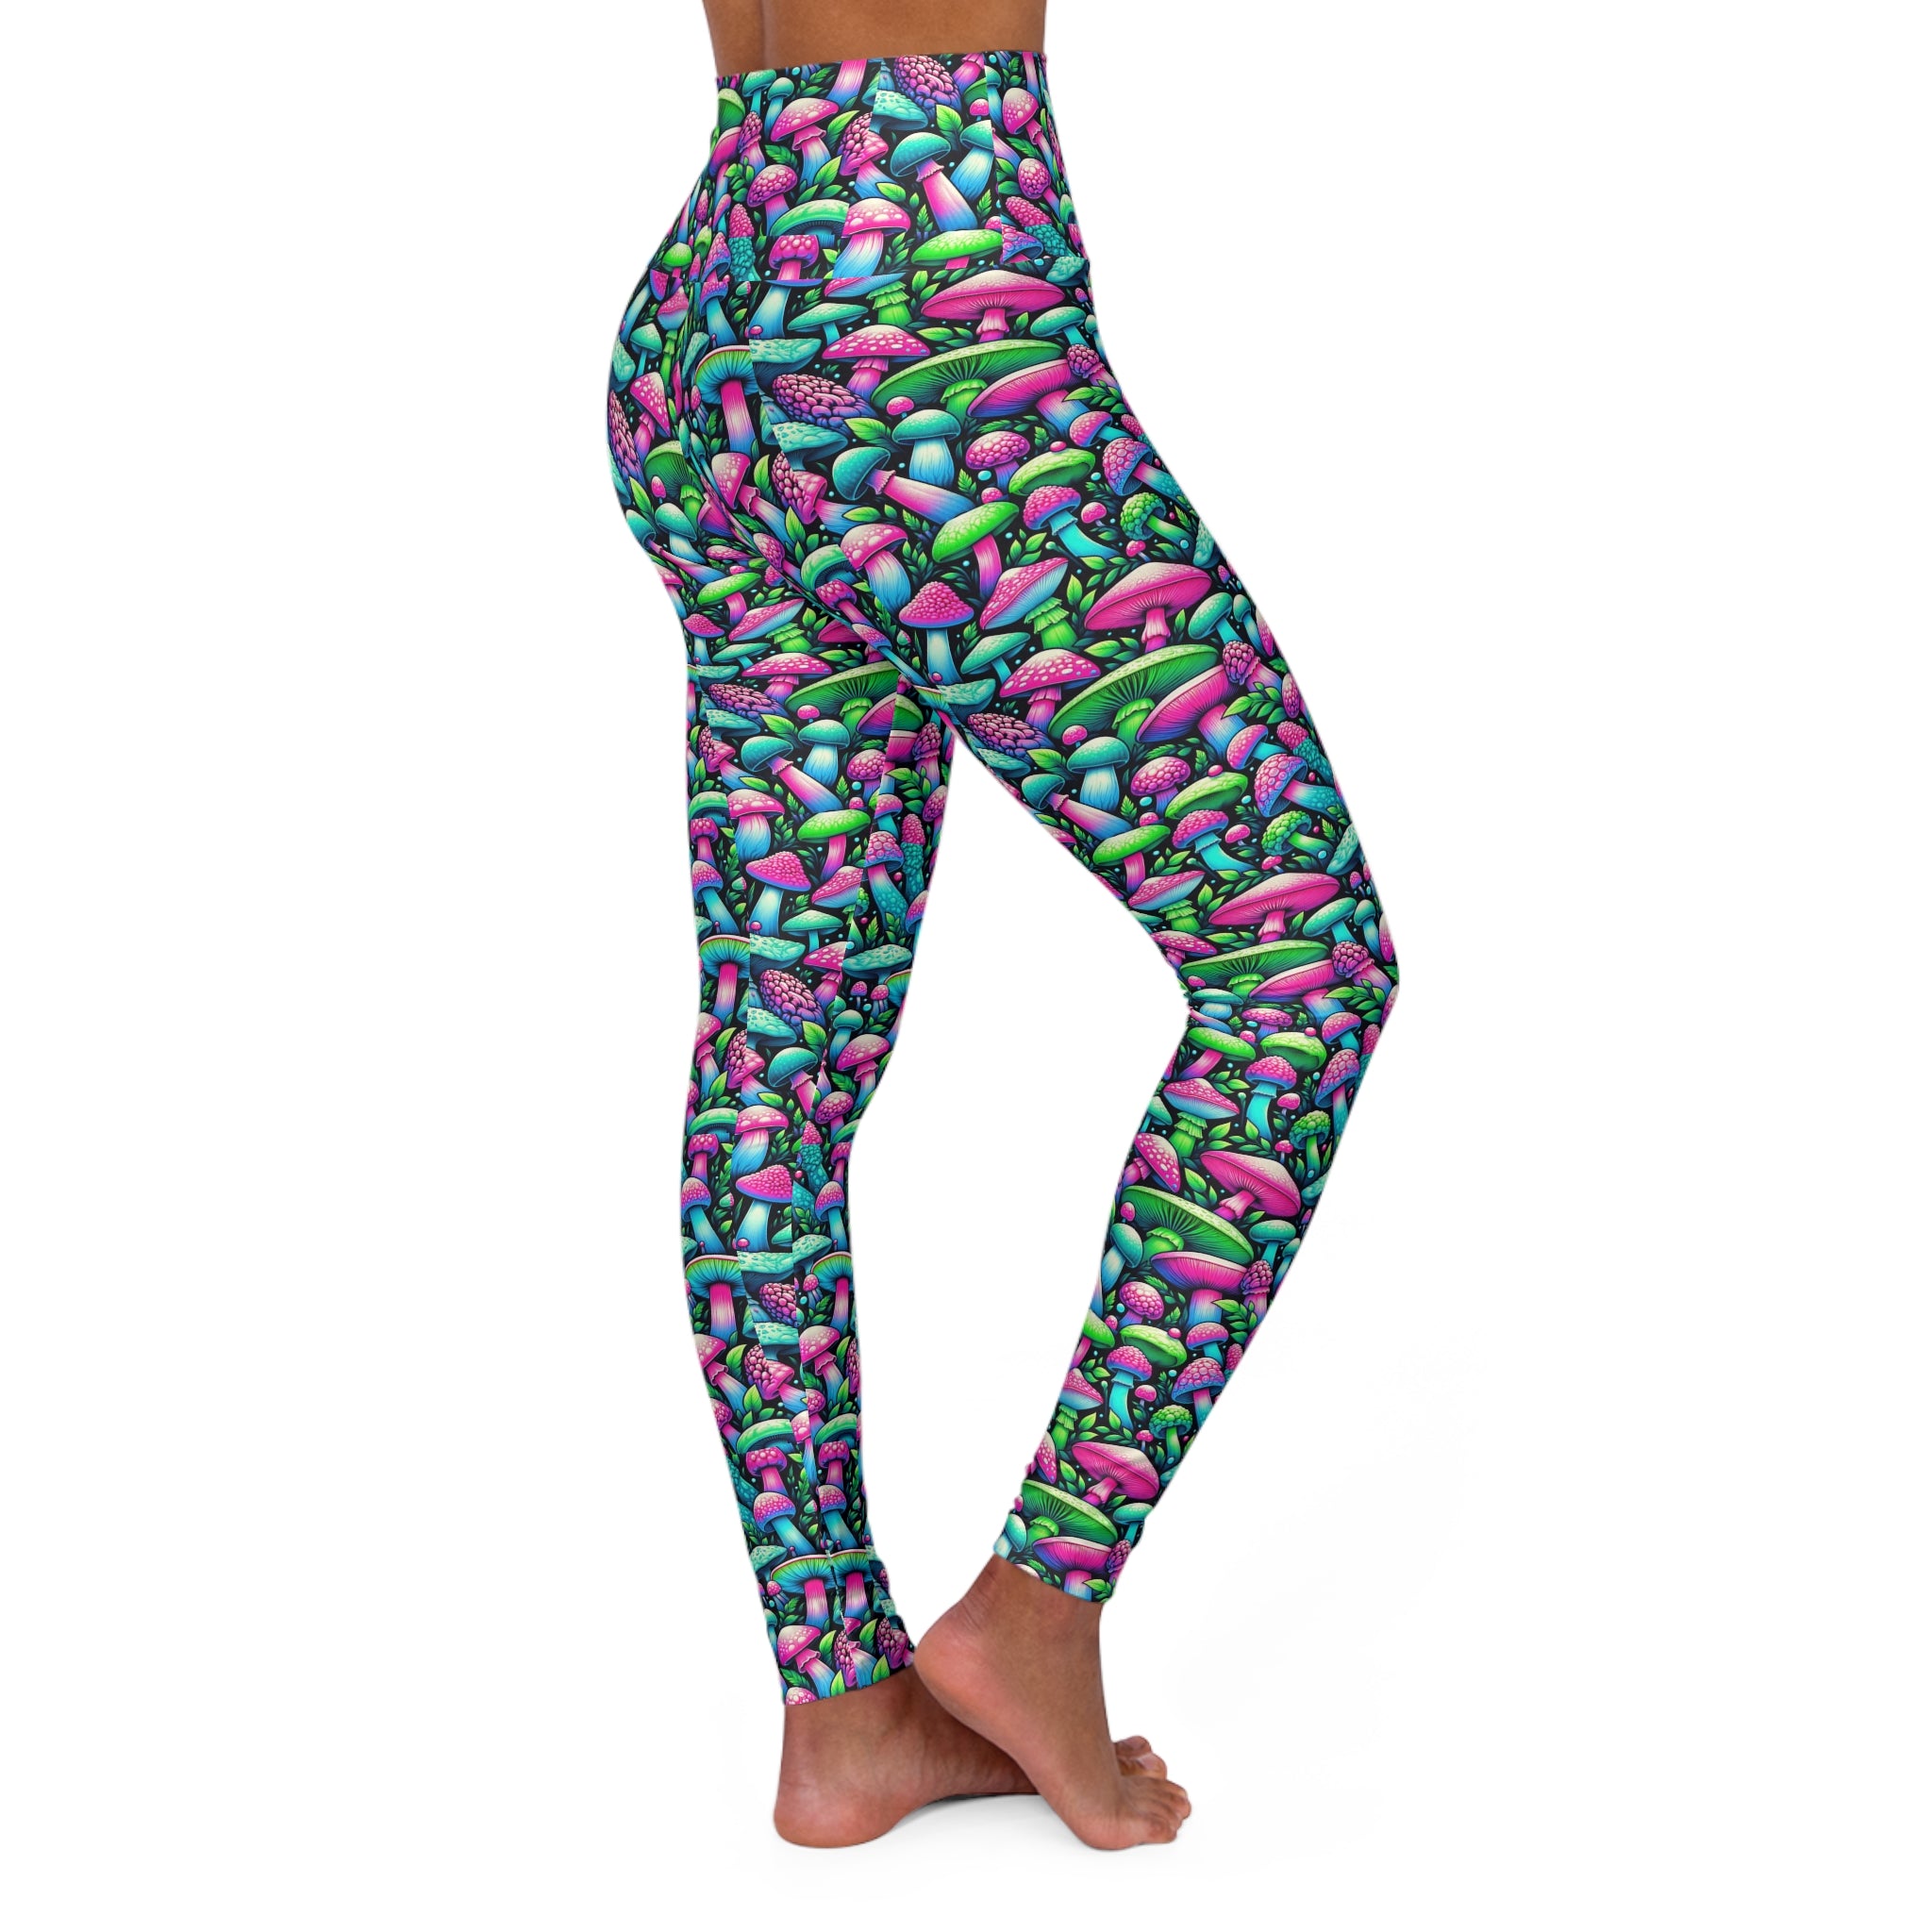 Bright Neon Mushroom Gym Leggings for Women S-2XL - Colorful, Trendy & Supportive Workout Pants